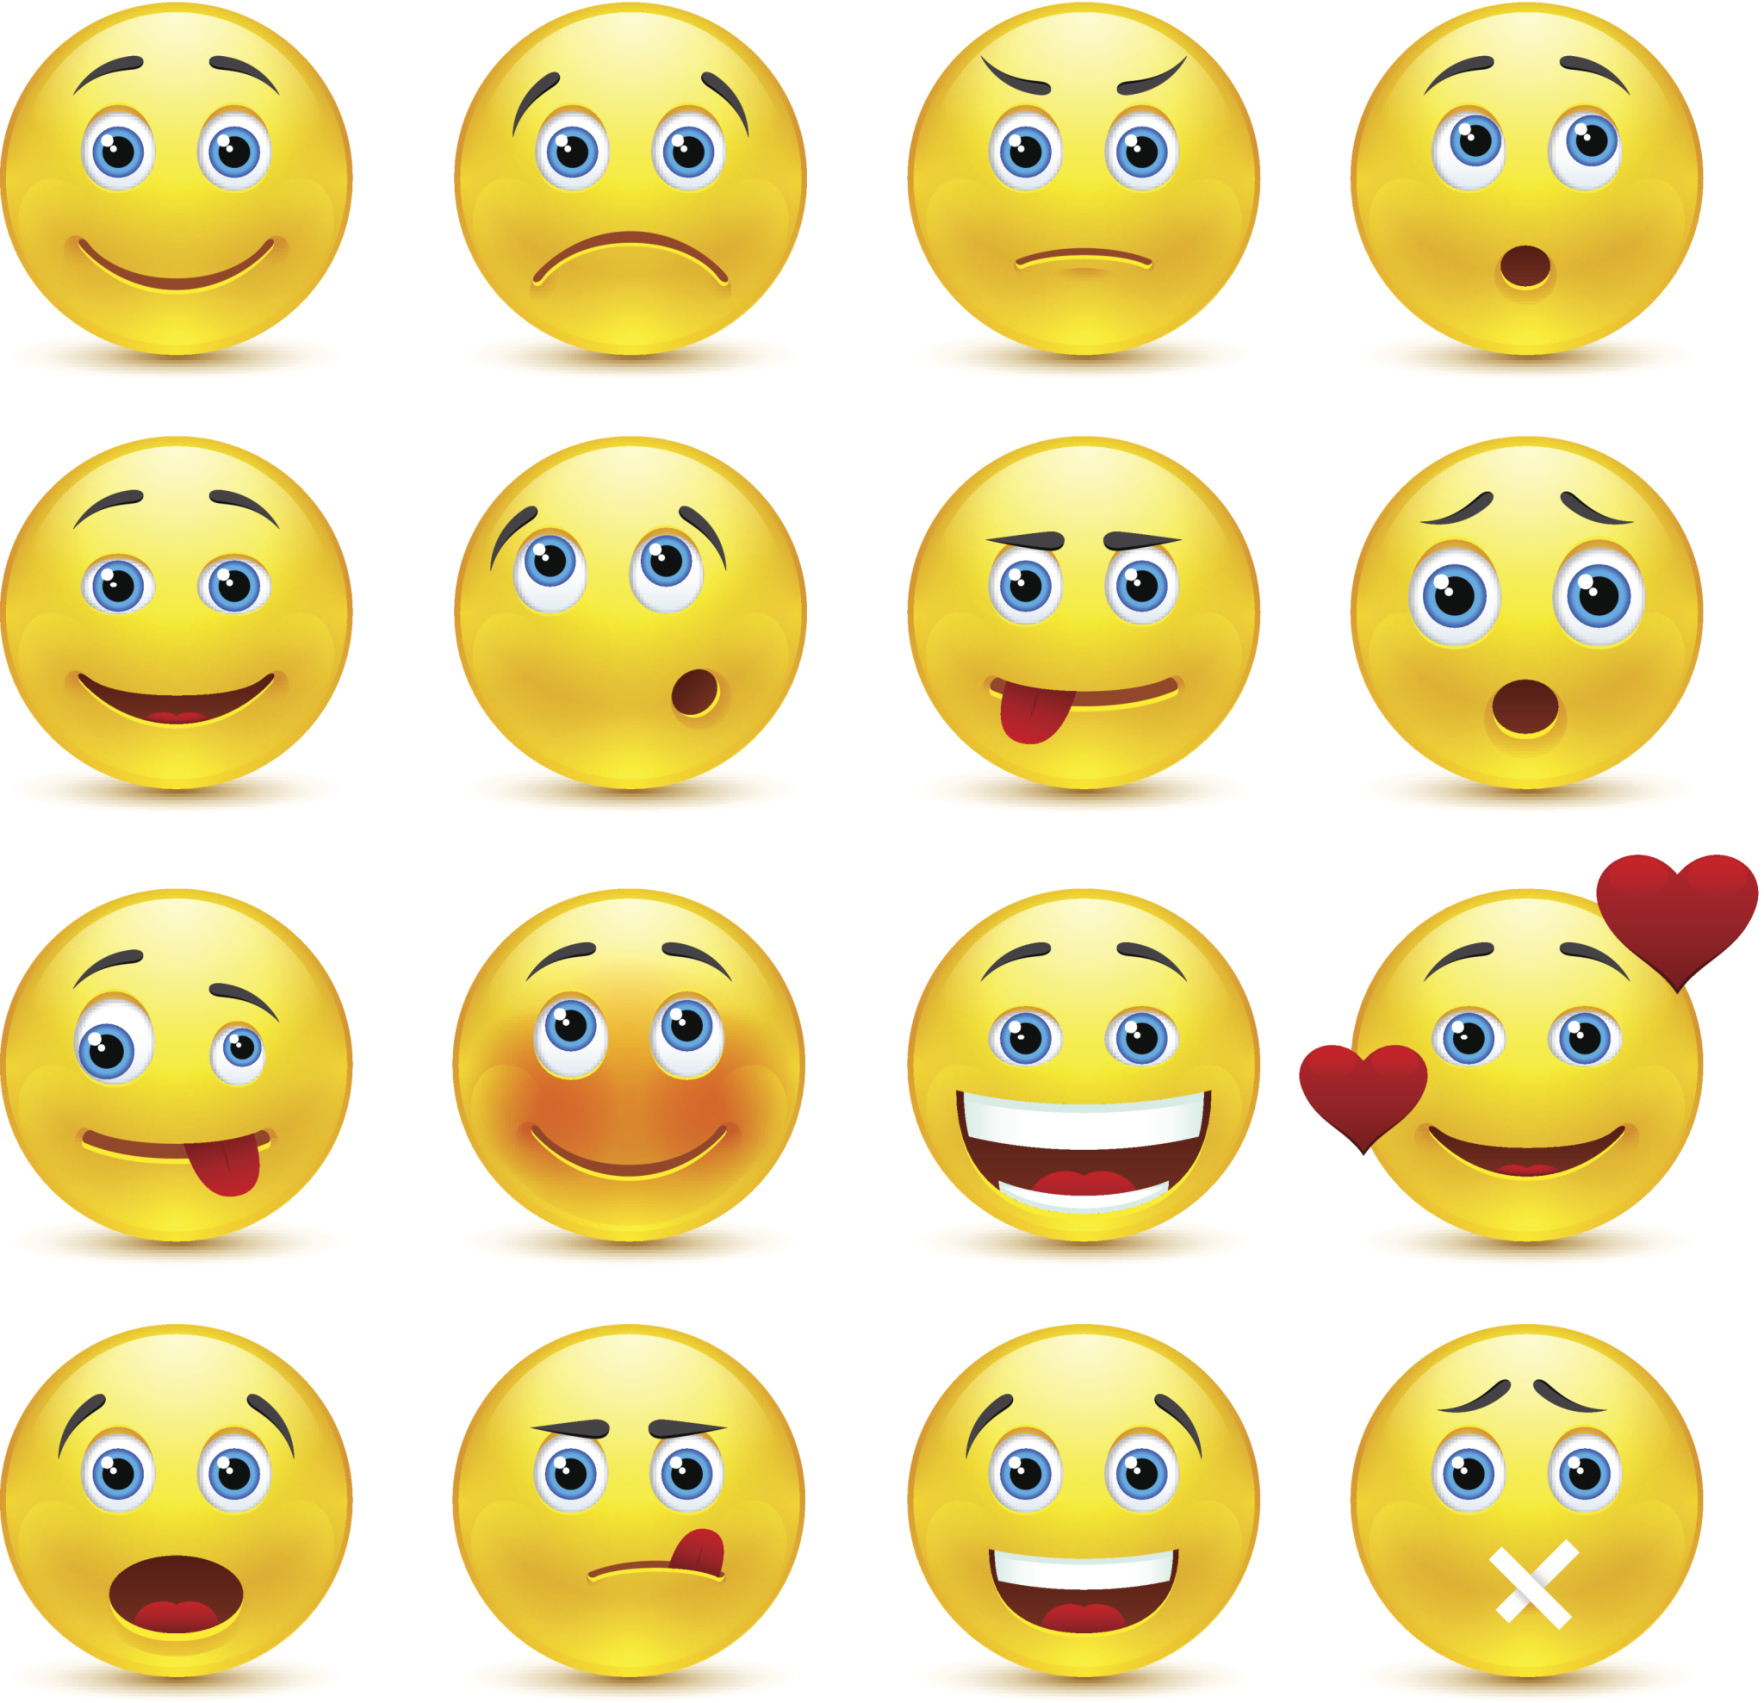 funny square expression icons free download